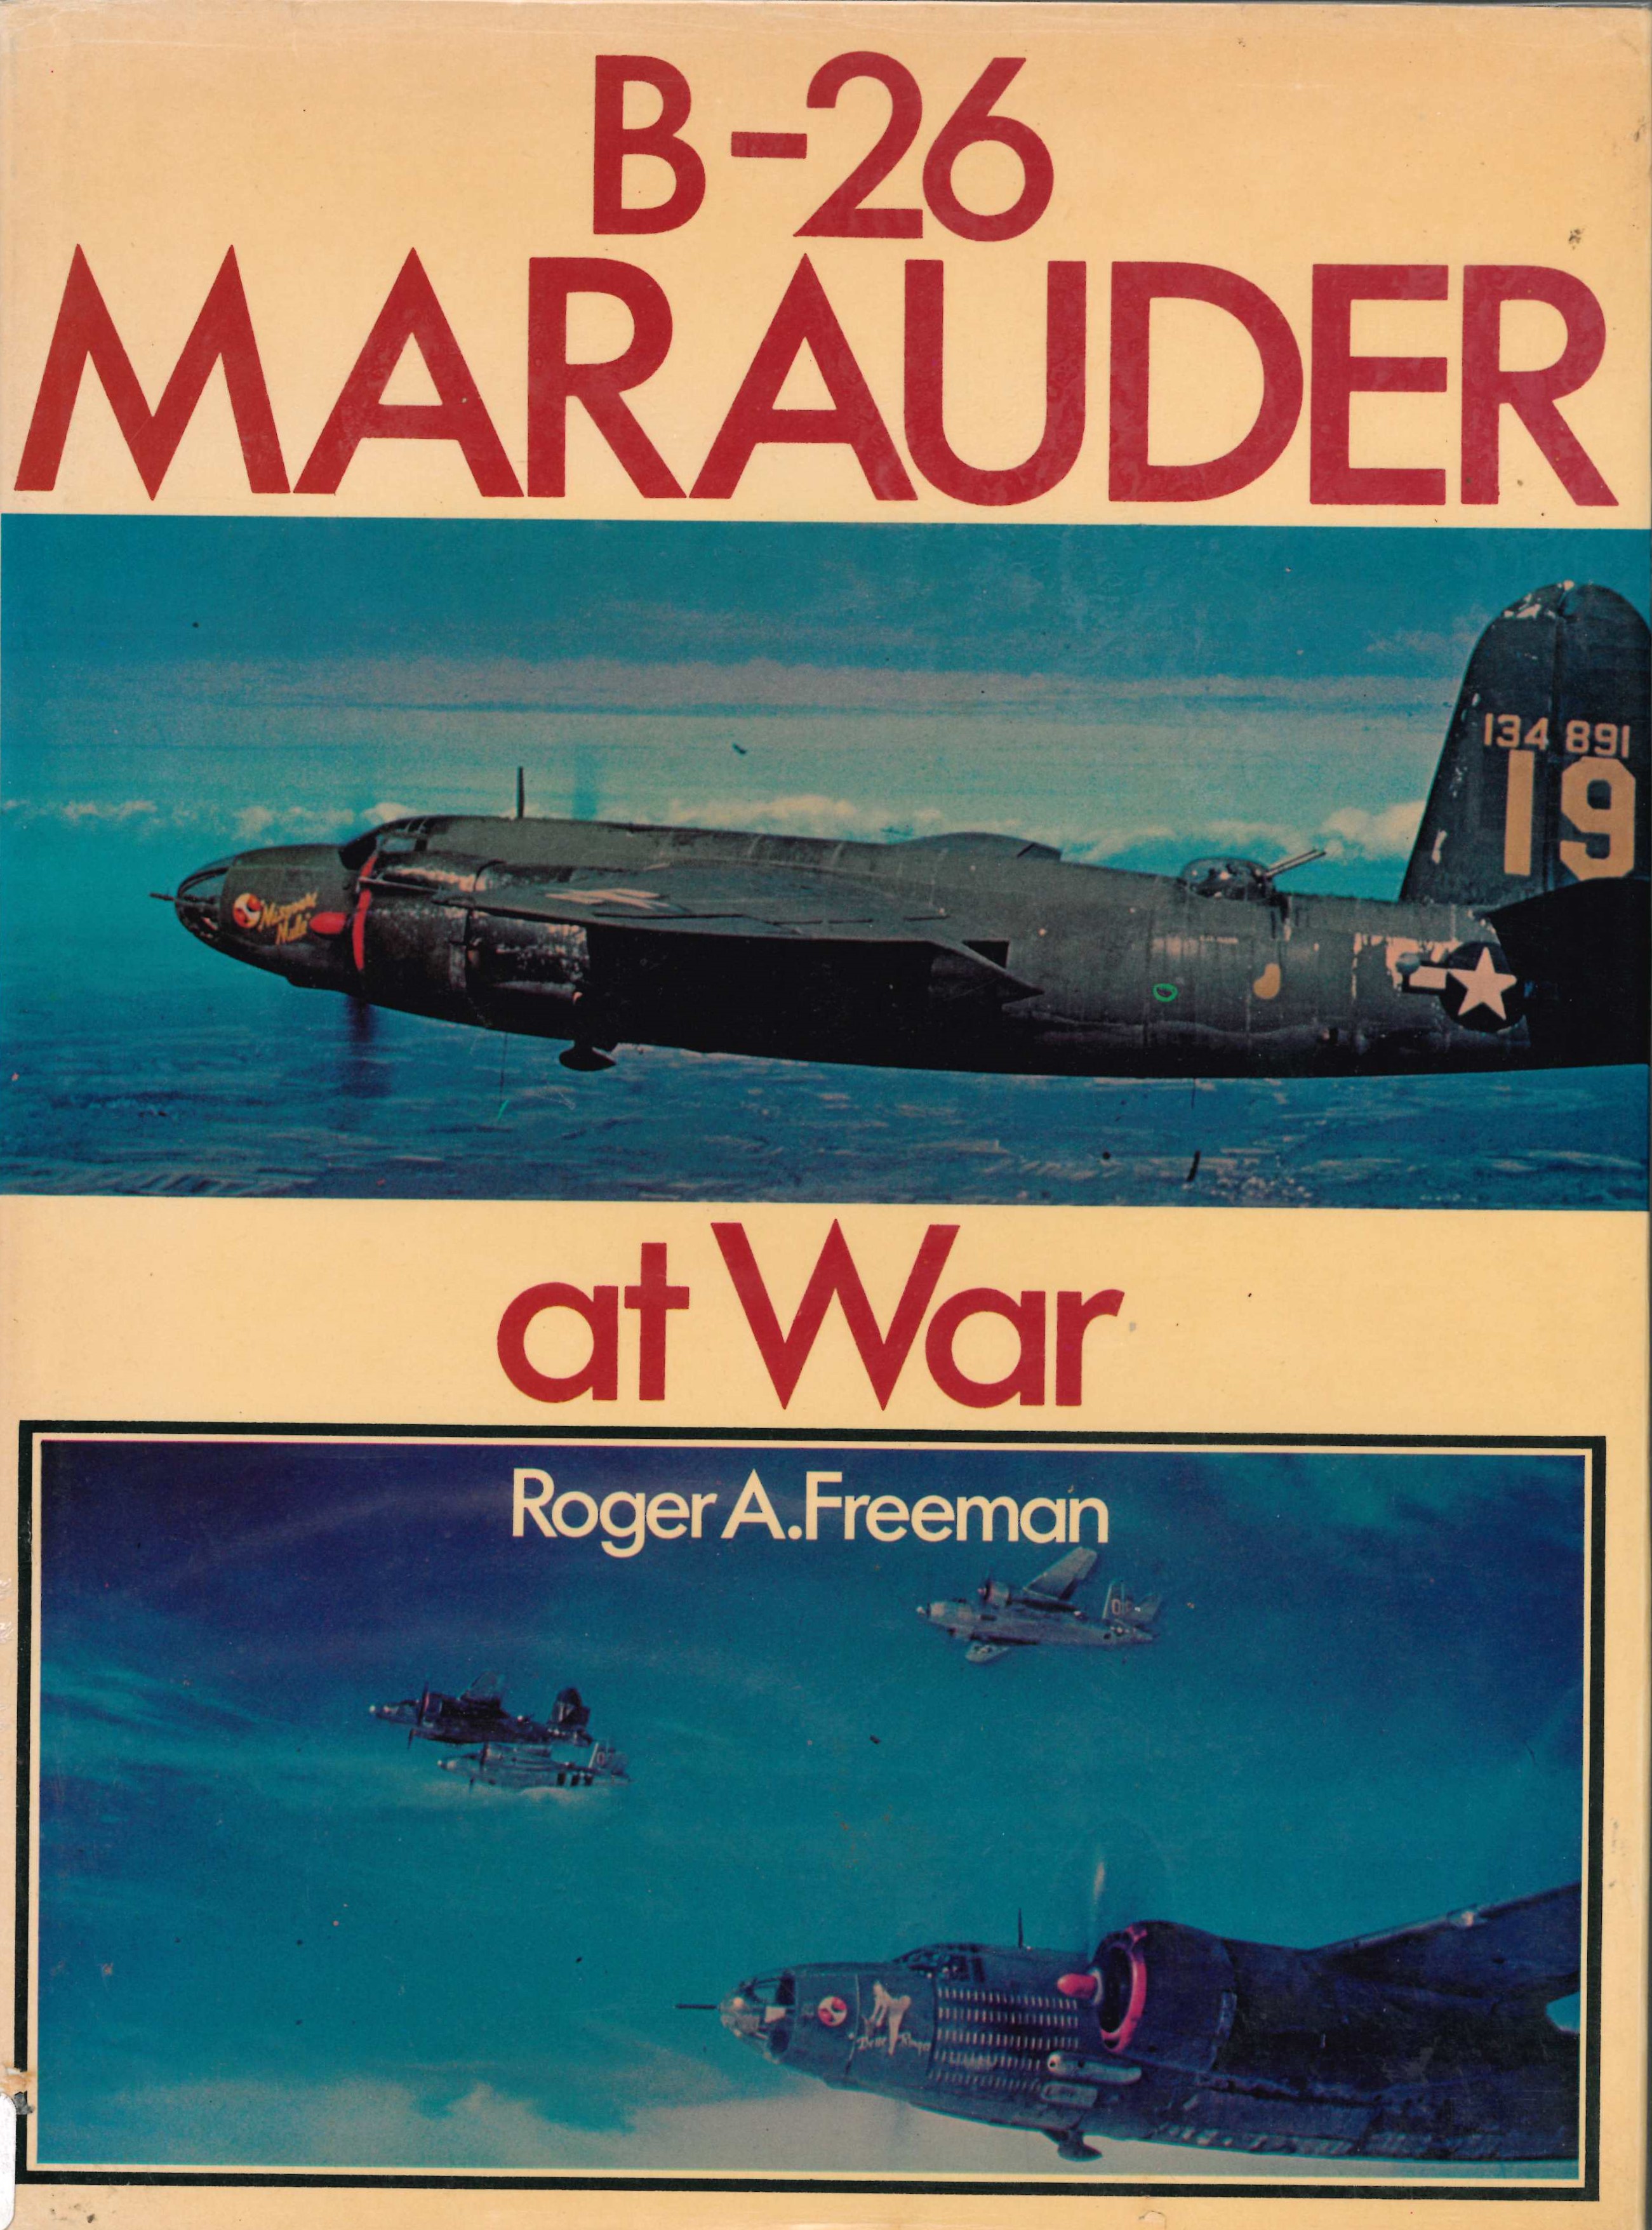 Cover of publication called B-26 Marauder at war by Roger Freeman